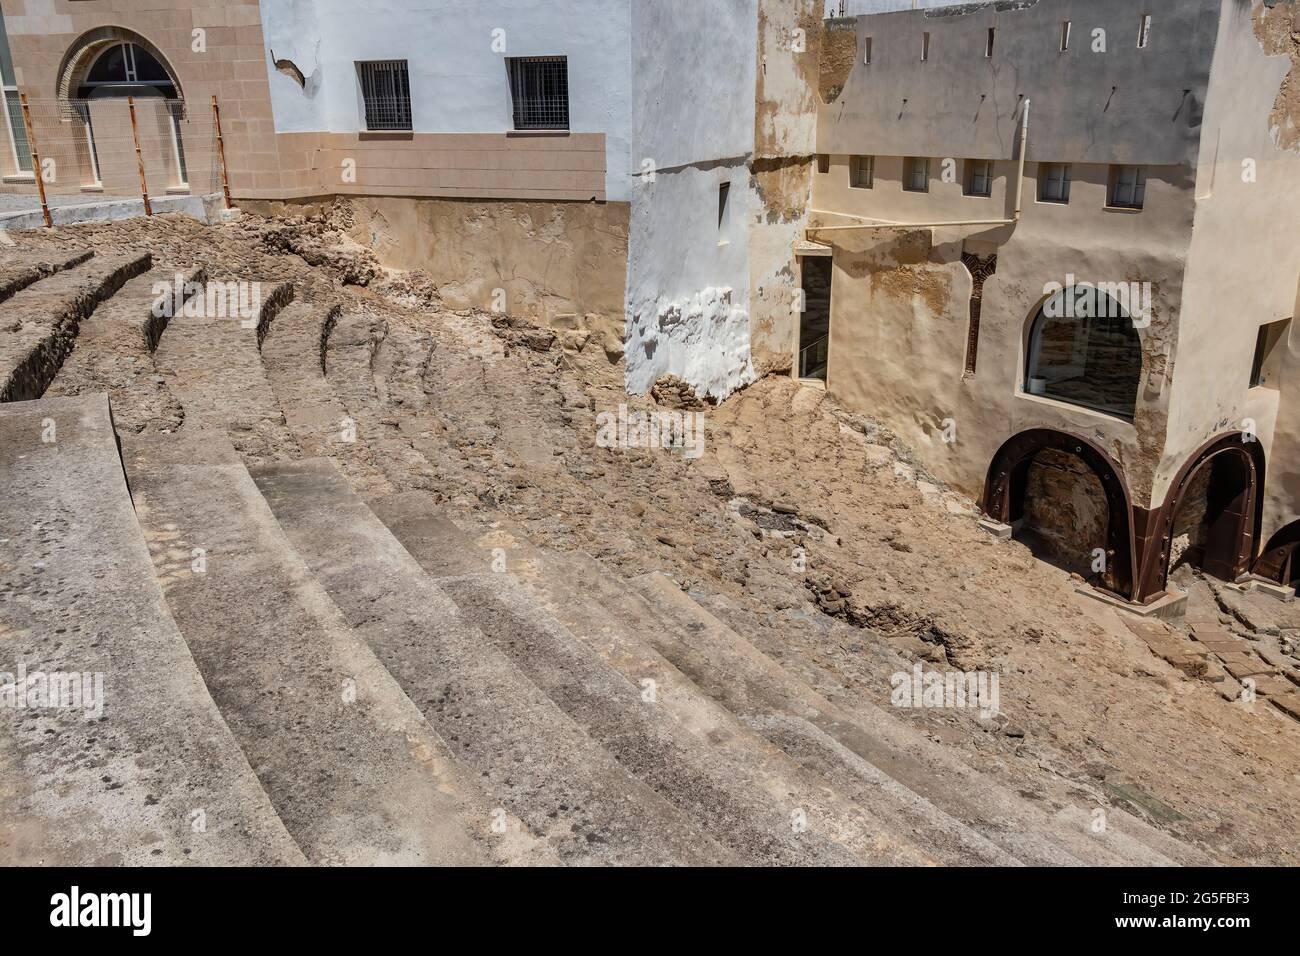 The Roman Theater of Cádiz. It was discovered in 1980 during excavations. It is the second largest theater in Roman Hispania, surpassed only by Córdob Stock Photo